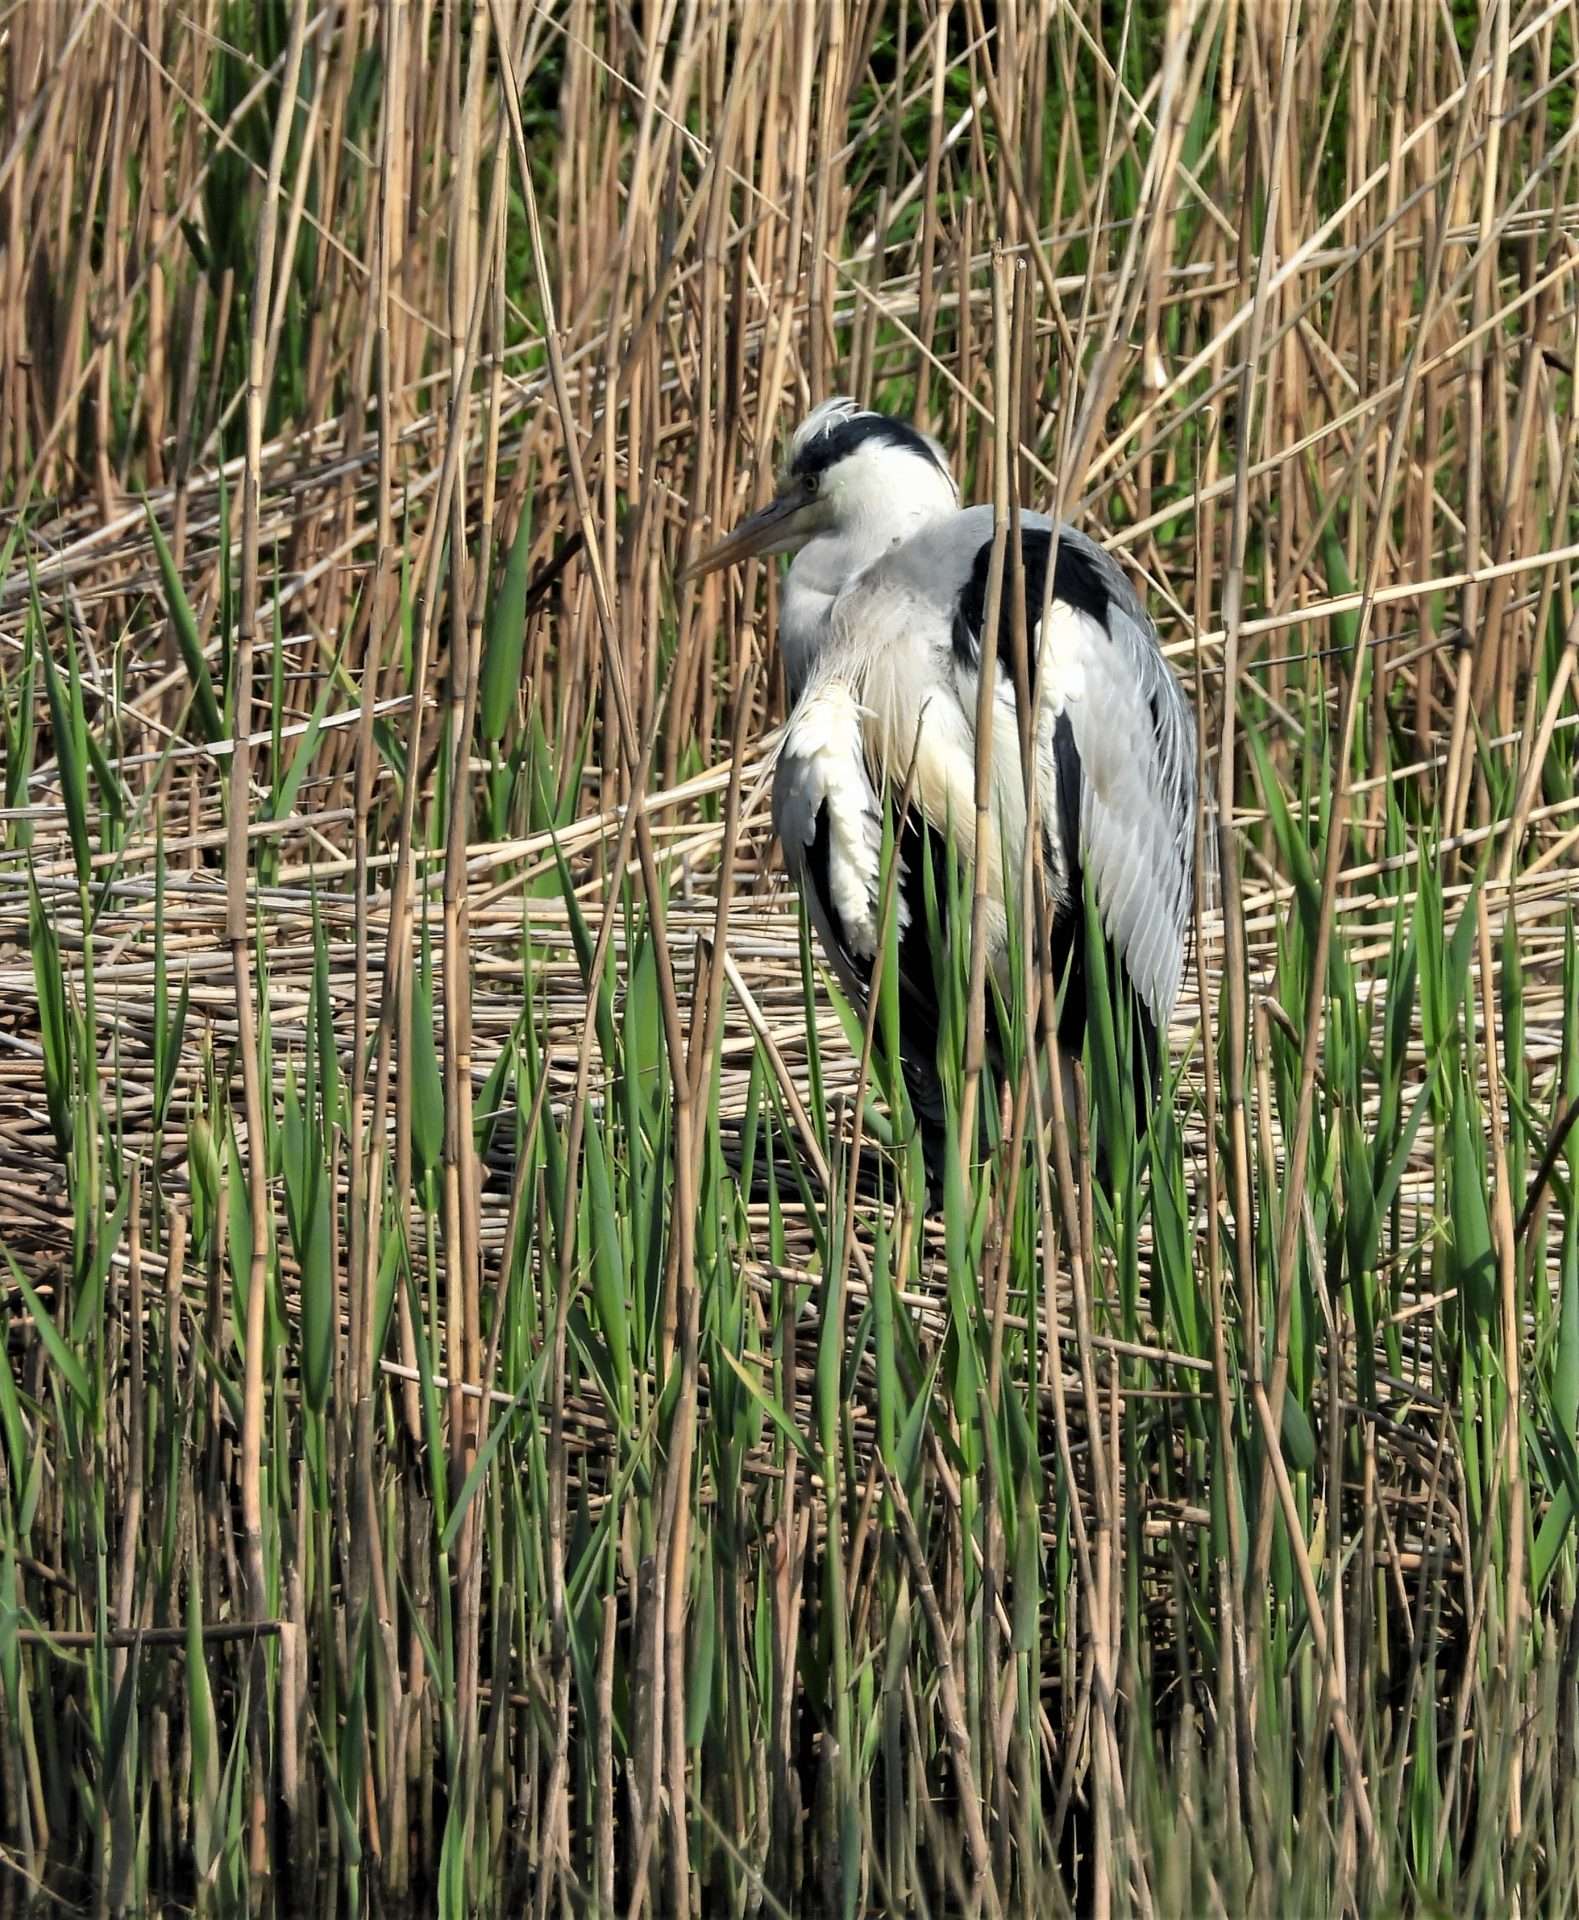 Grey Heron by Kenneth Bradley at Exminster marshes RSPB